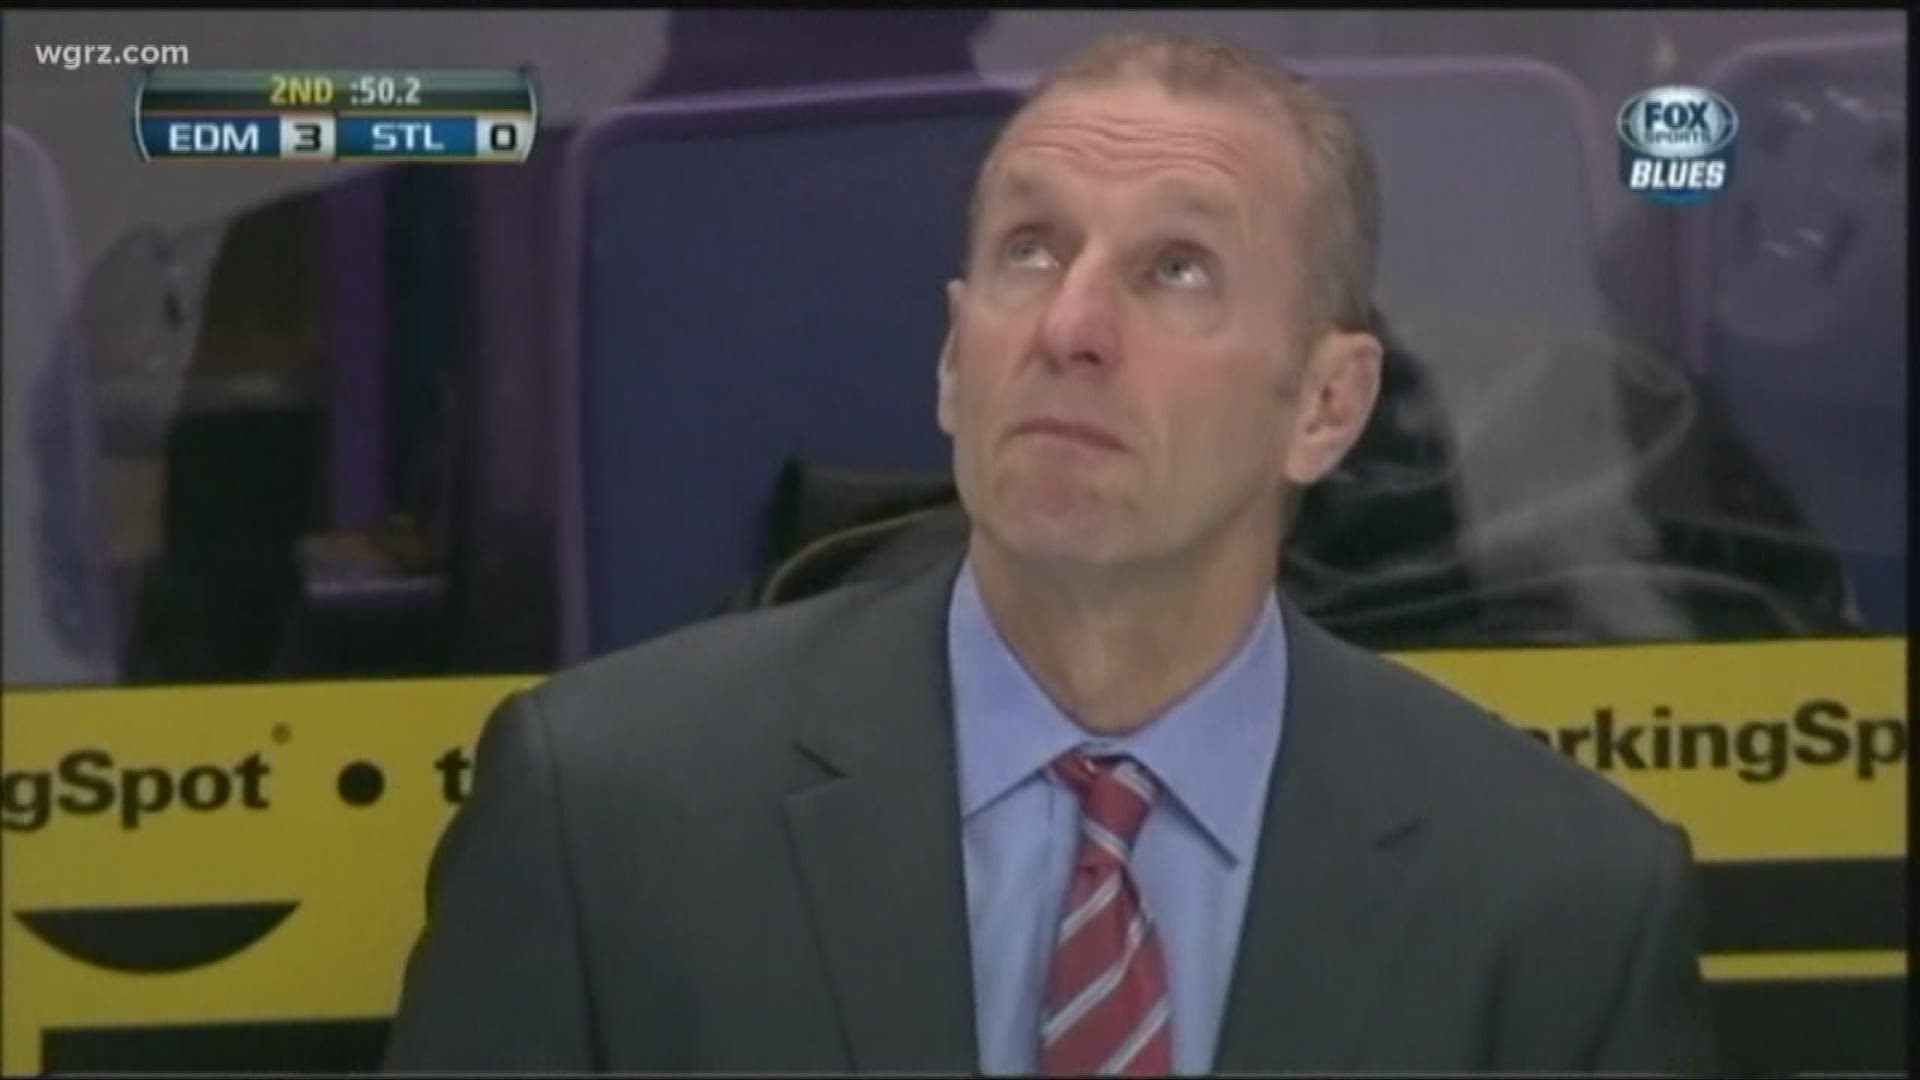 Ralph Krueger is said to have a very good reputation inside hockey.